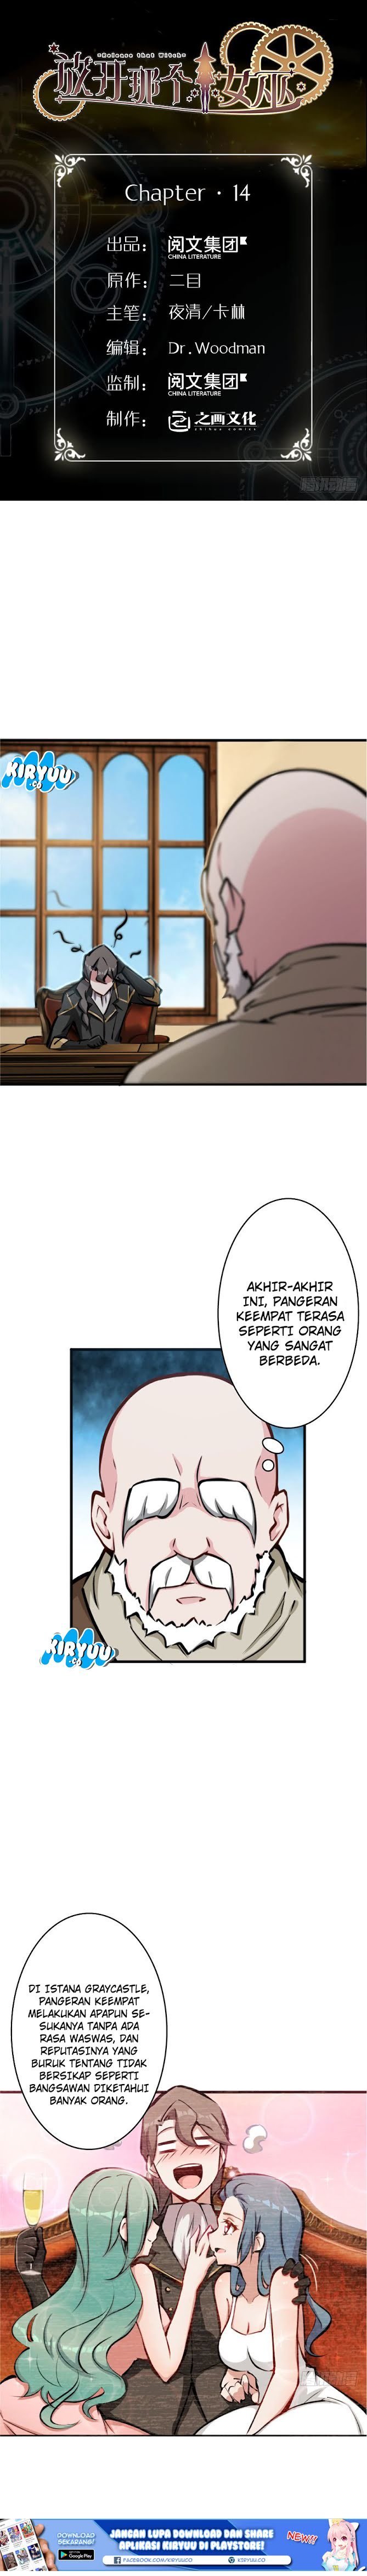 Release That Witch Chapter 14 bahasa indonesia